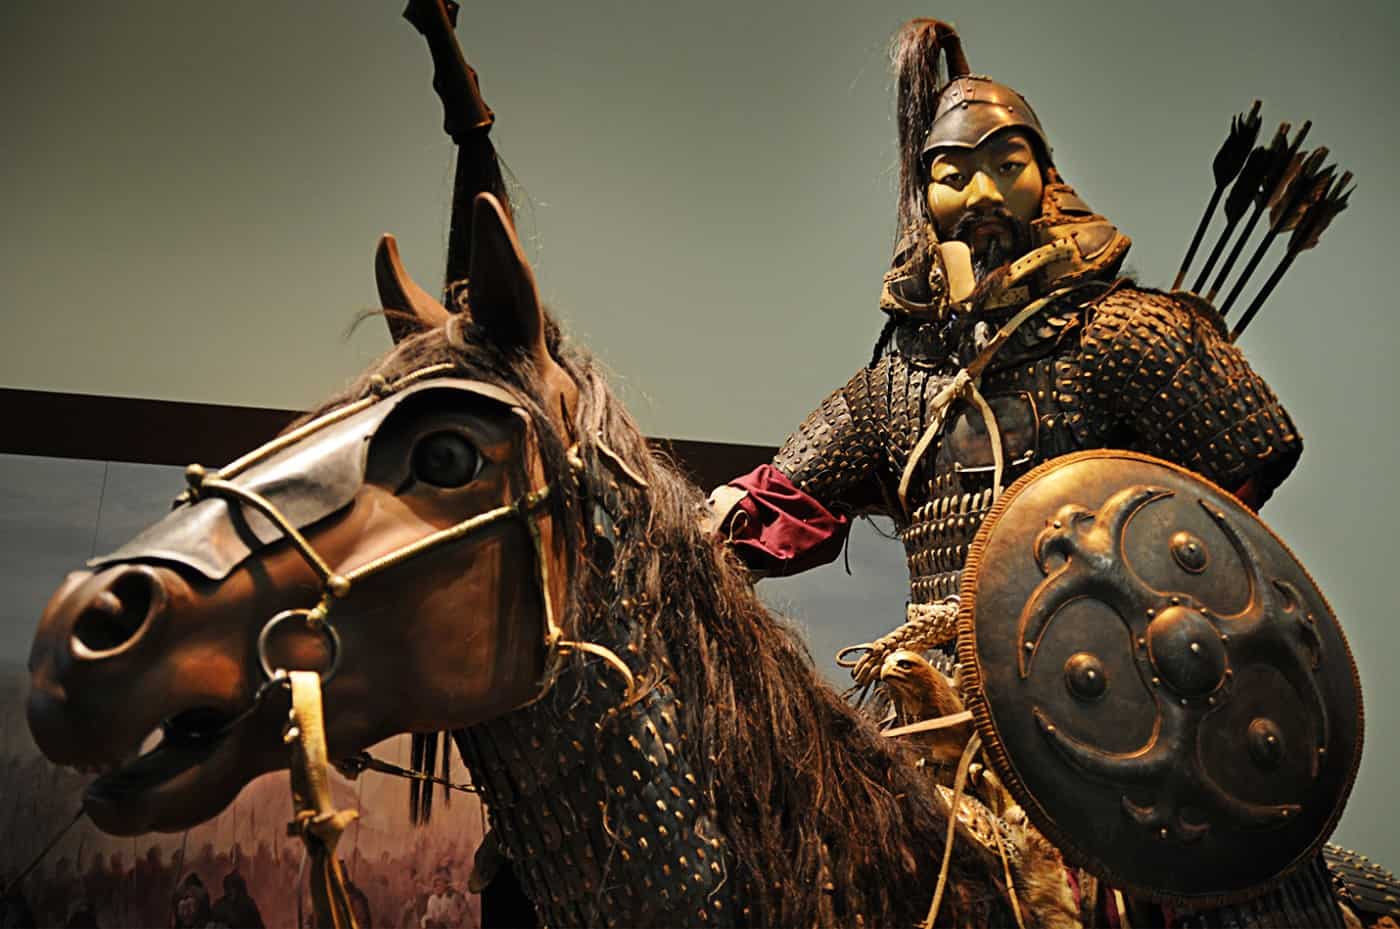 Of The Best Genghis Khan Quotes To Bring Out Warrior In You